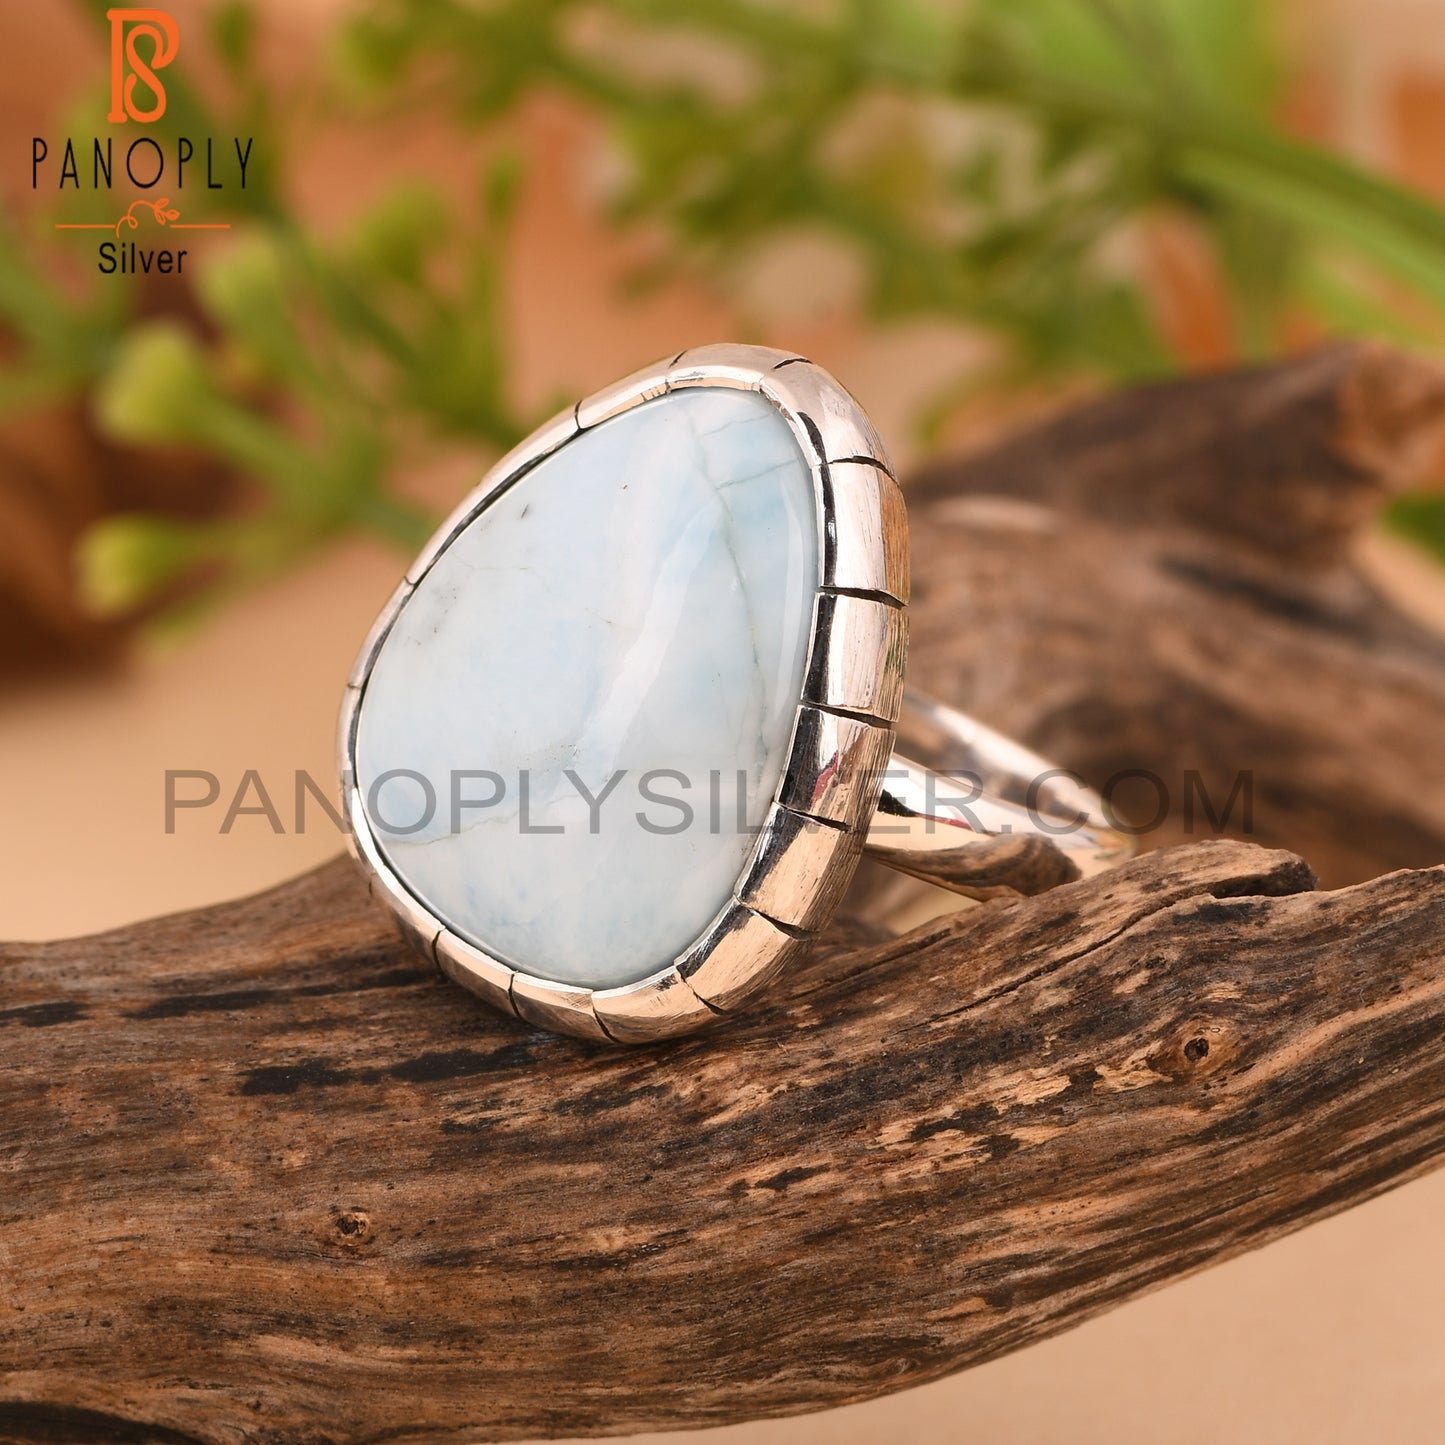 Attractive Larimar 925 Sterling Silver Wedding Band Ring